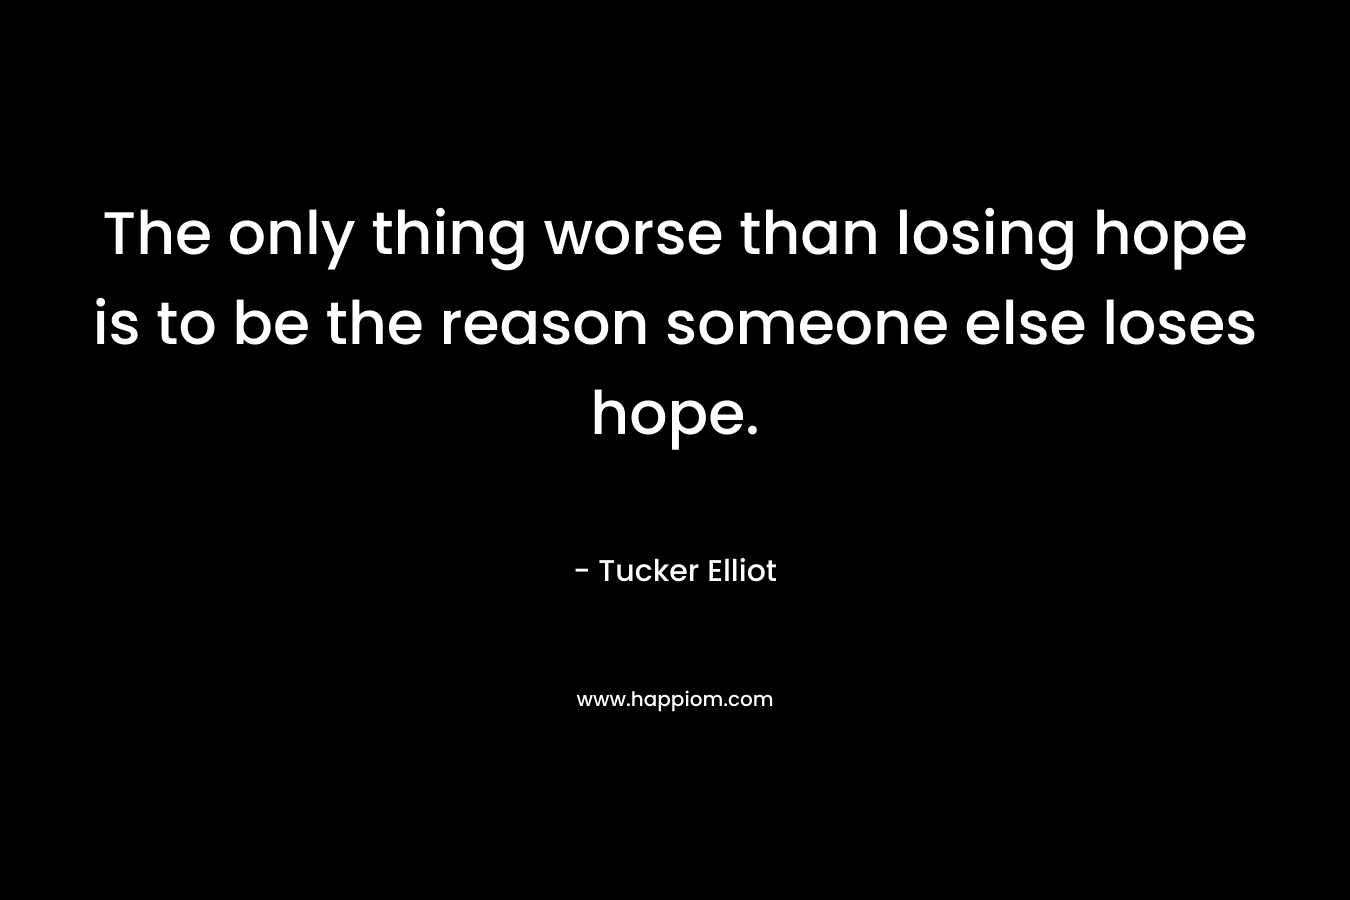 The only thing worse than losing hope is to be the reason someone else loses hope. – Tucker Elliot